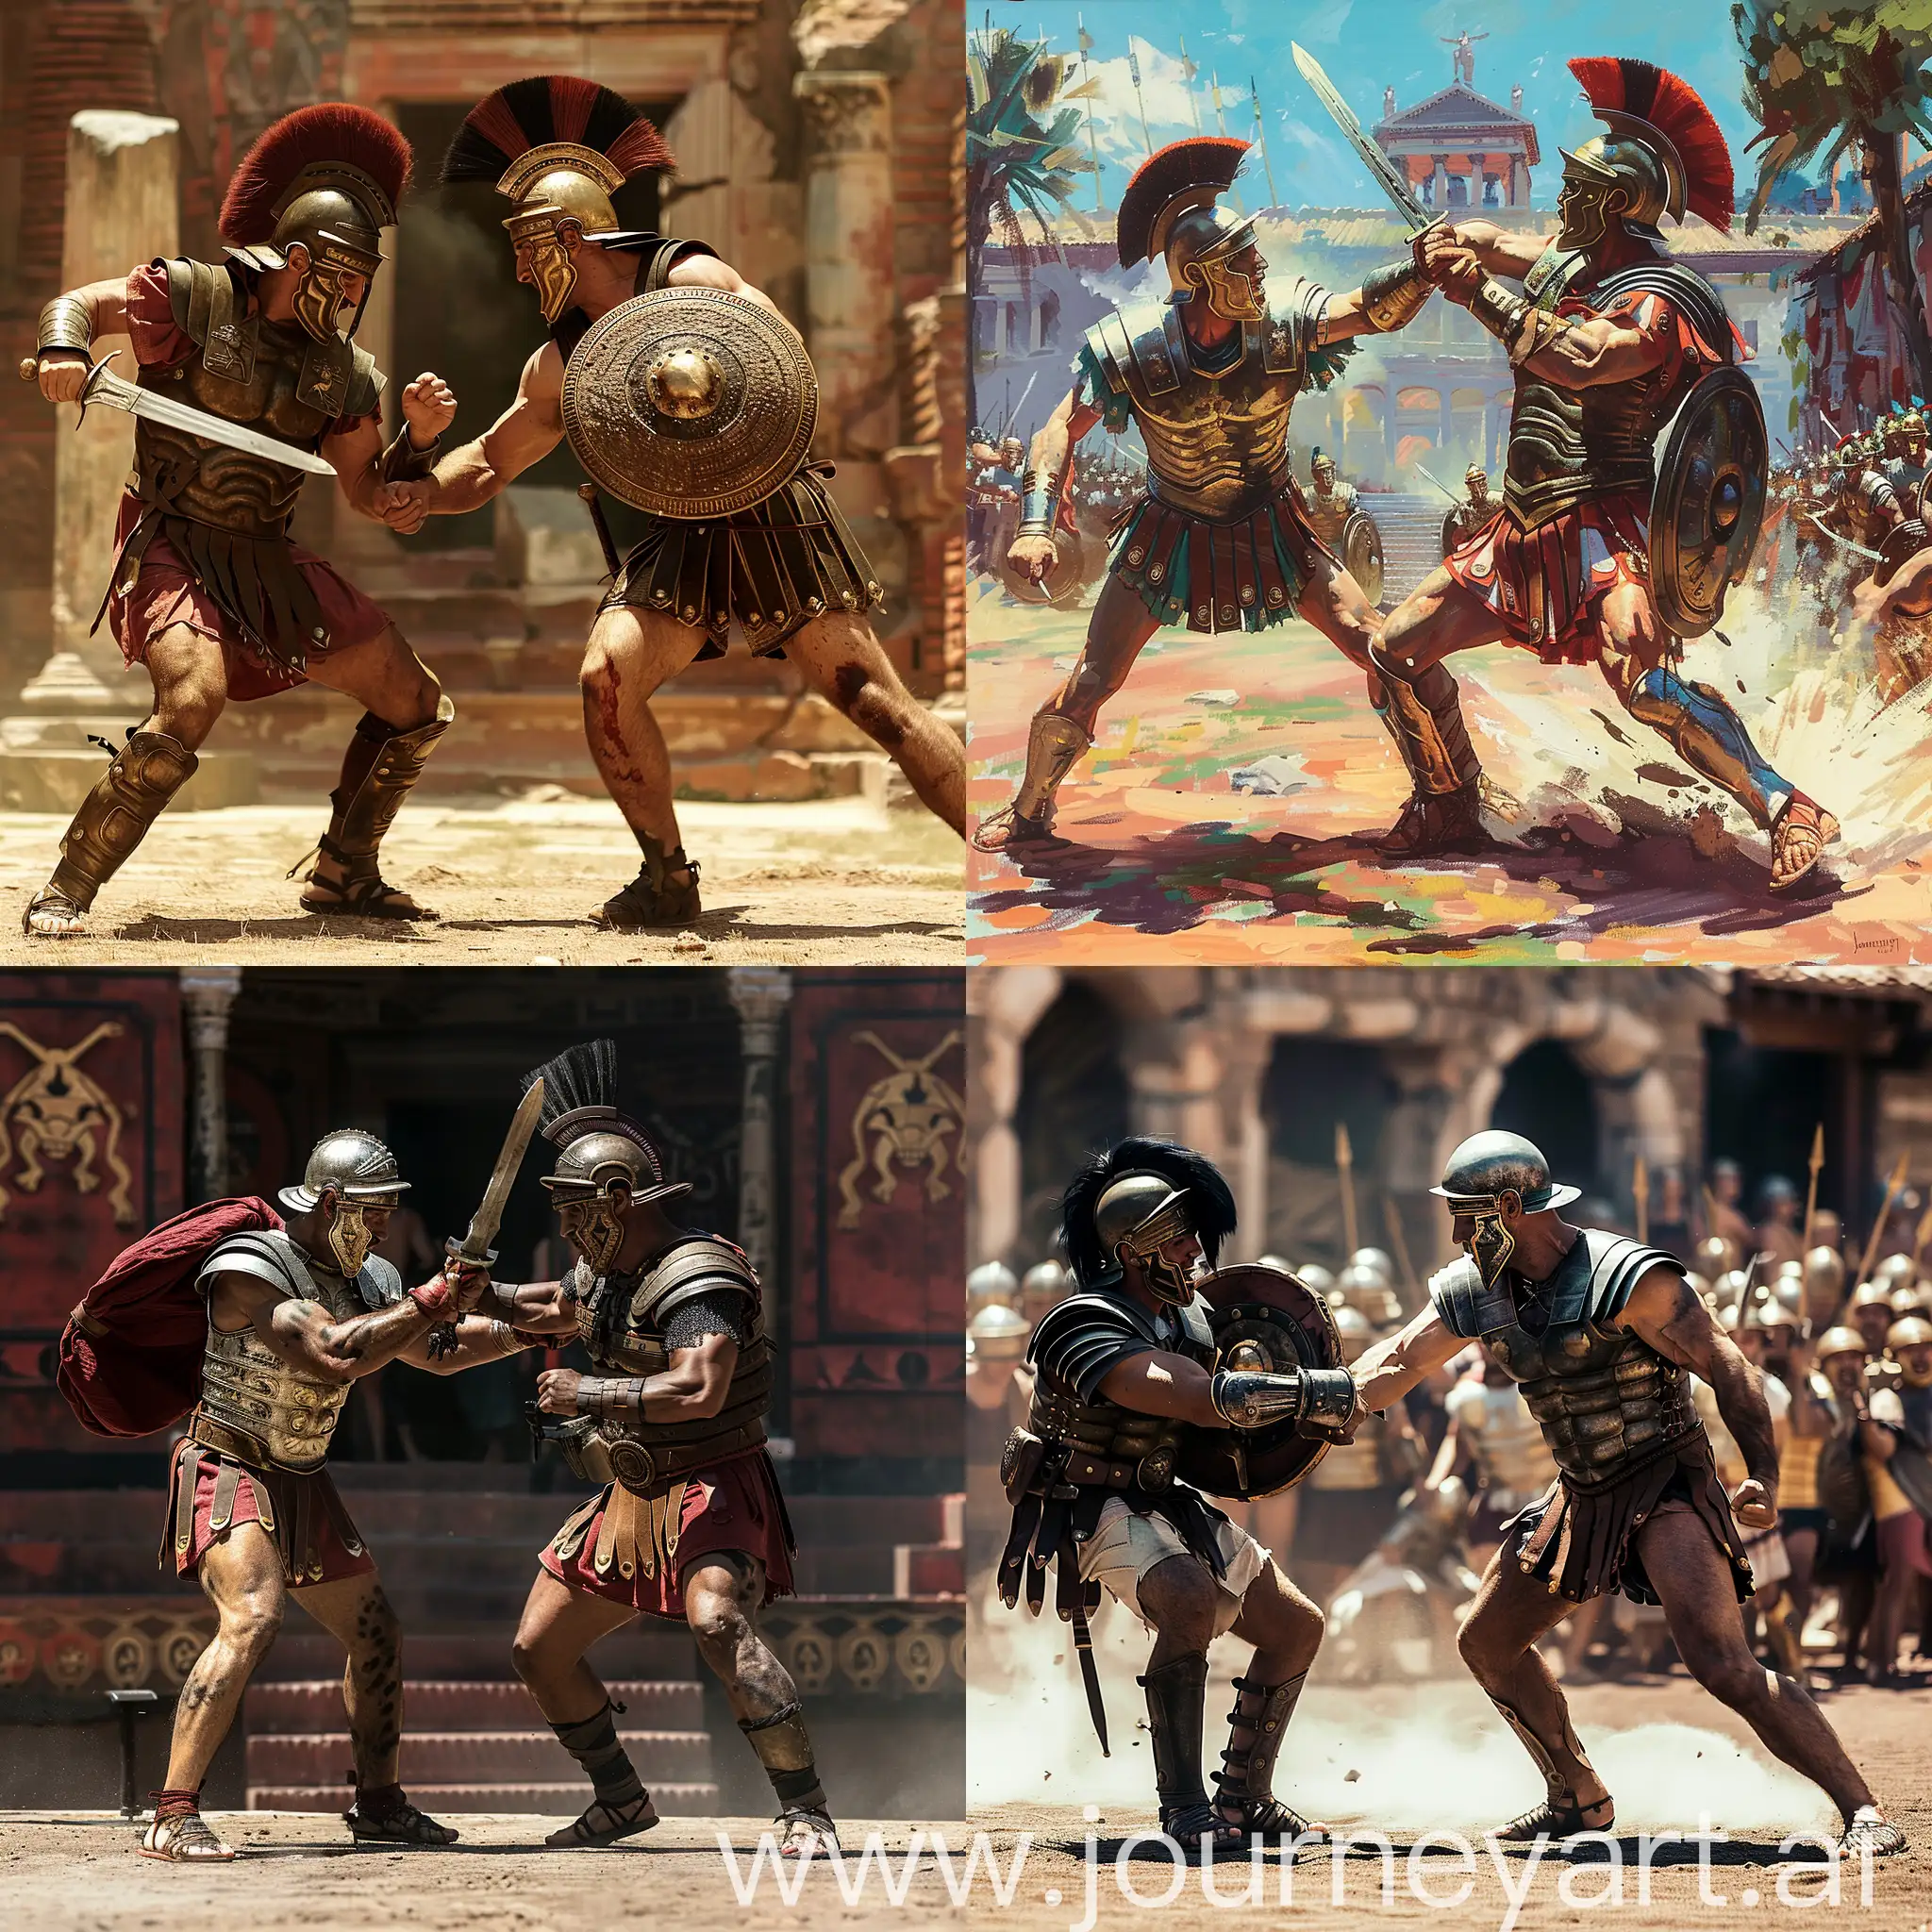 Epic-Clash-Roman-Soldier-Engages-Gladiator-in-Battle